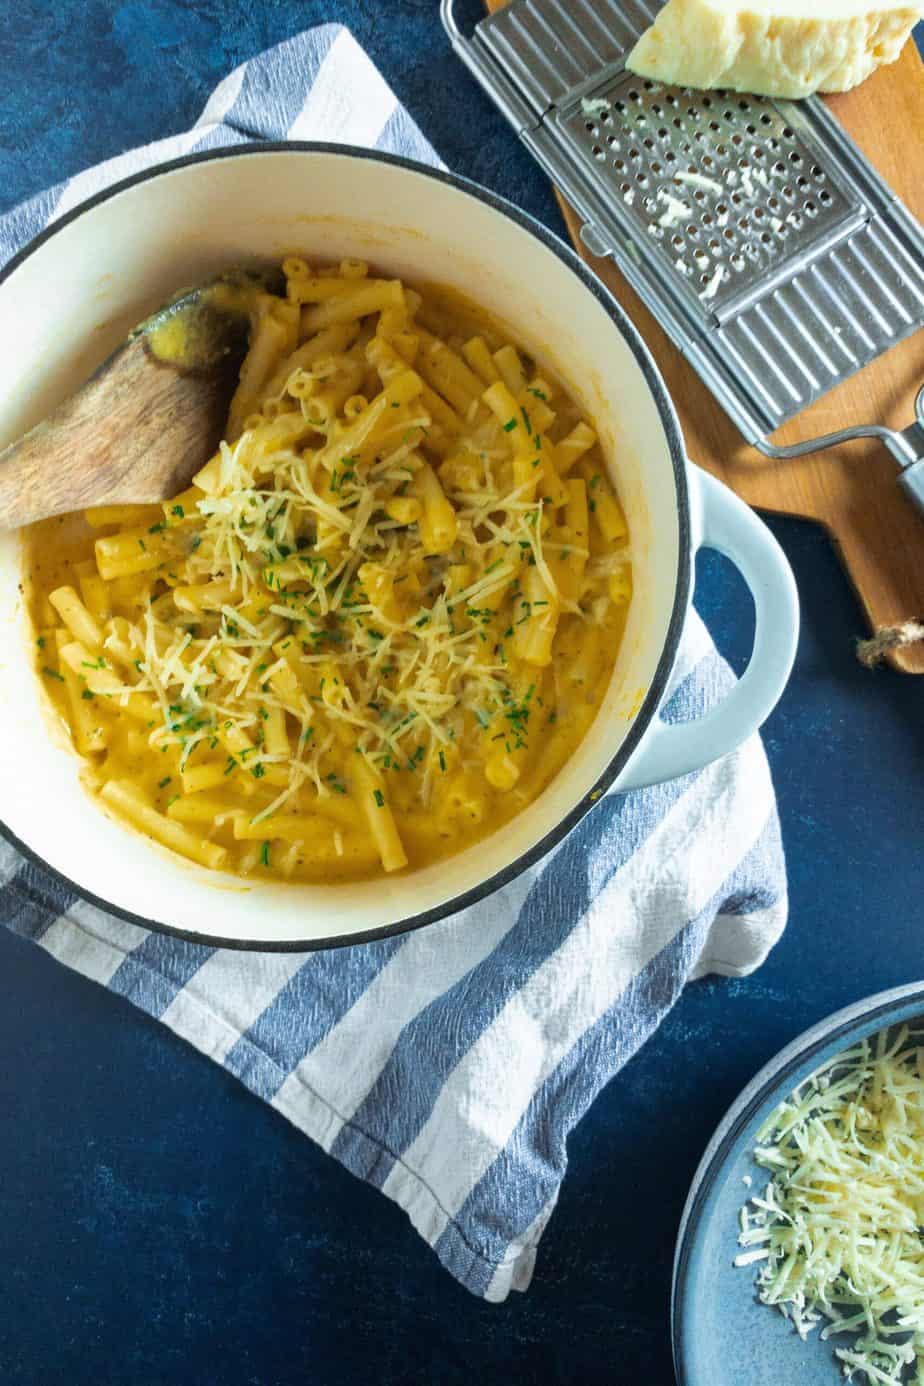 Lightened up version of the classic mac and cheese made with butternut squash. Delicious and healthy!